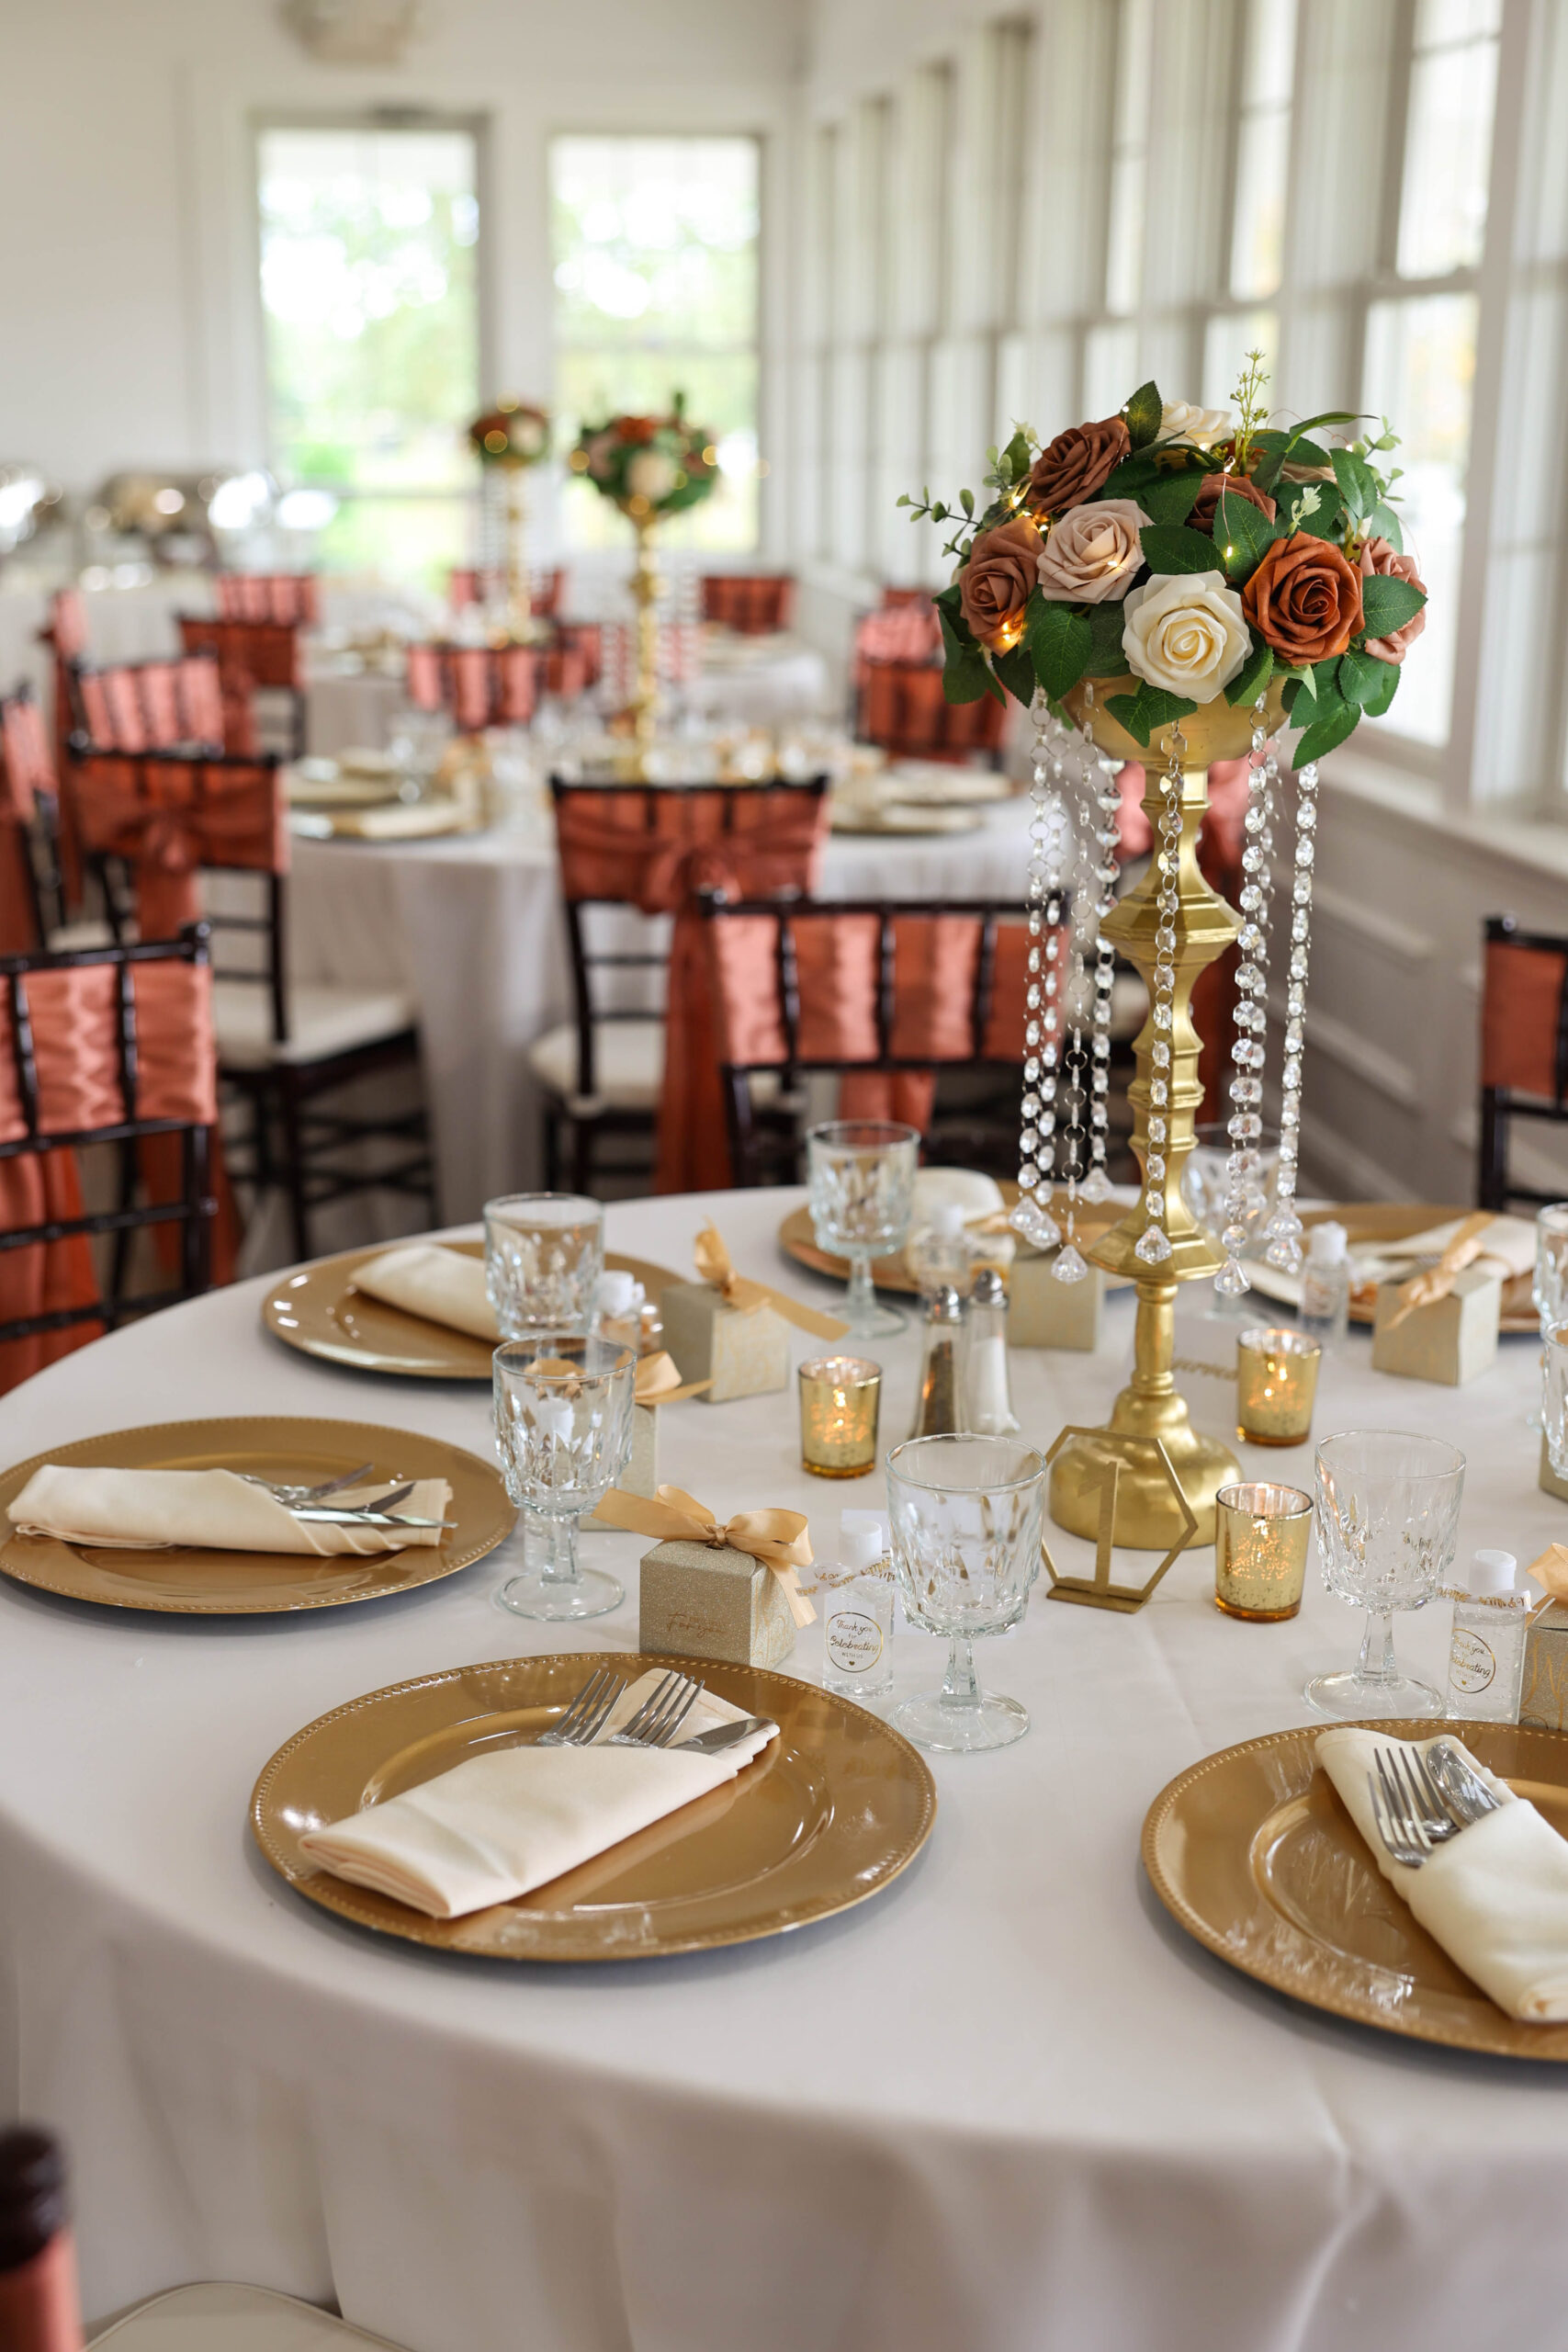 Wedding table settings in rose, gold, and ivory. Large topiary table centerpieces with flowers and pearls. Gold chargers for place settings.